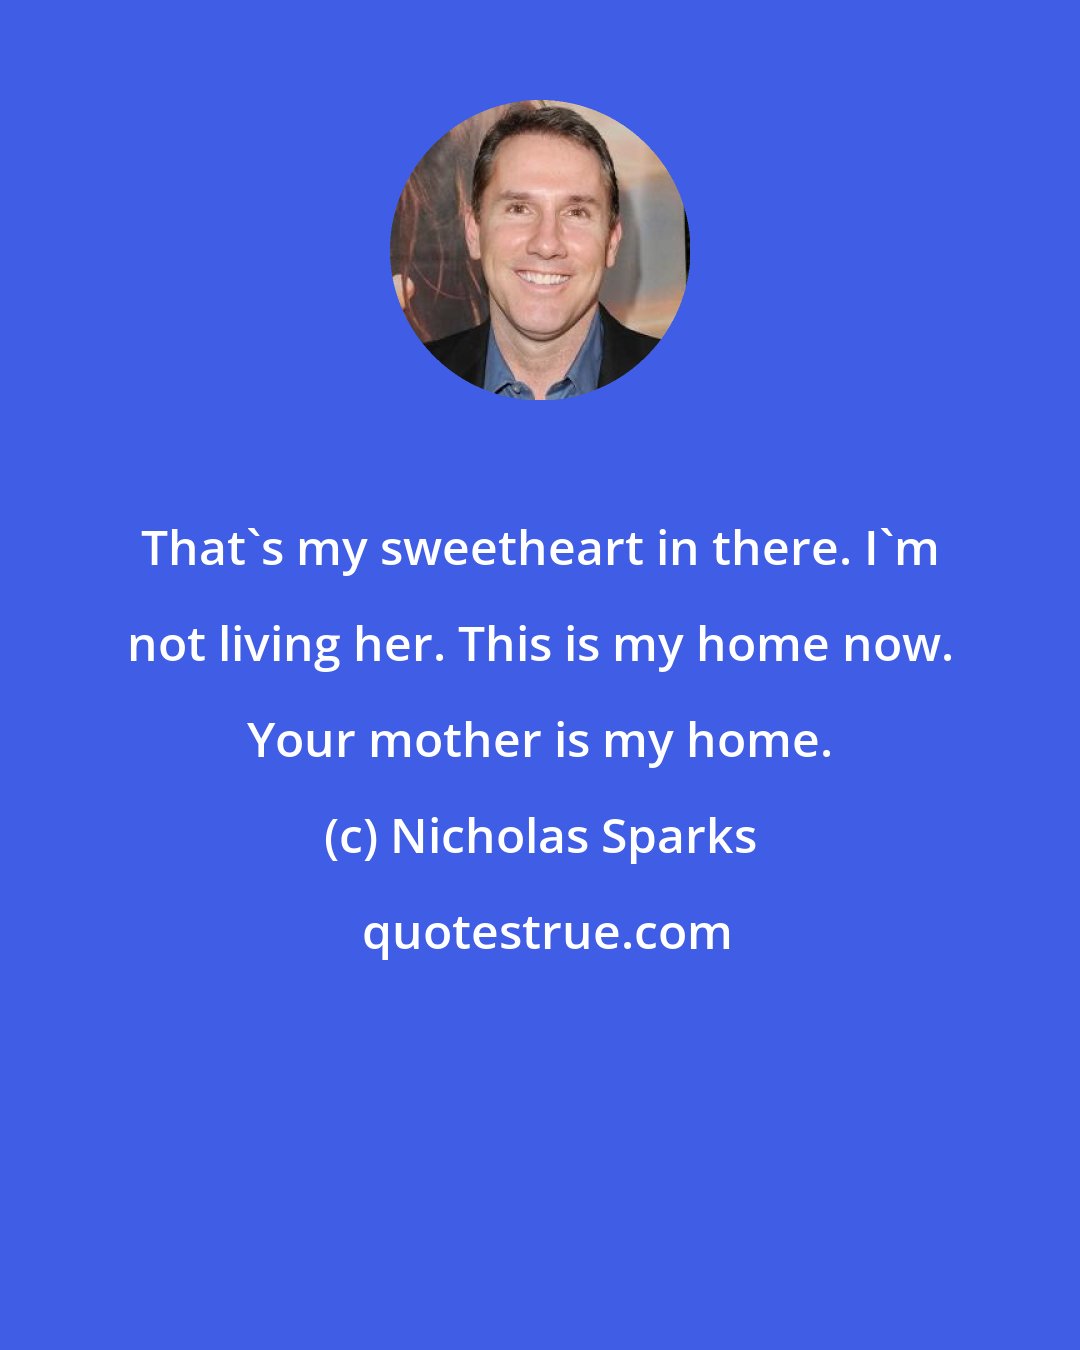 Nicholas Sparks: That's my sweetheart in there. I'm not living her. This is my home now. Your mother is my home.